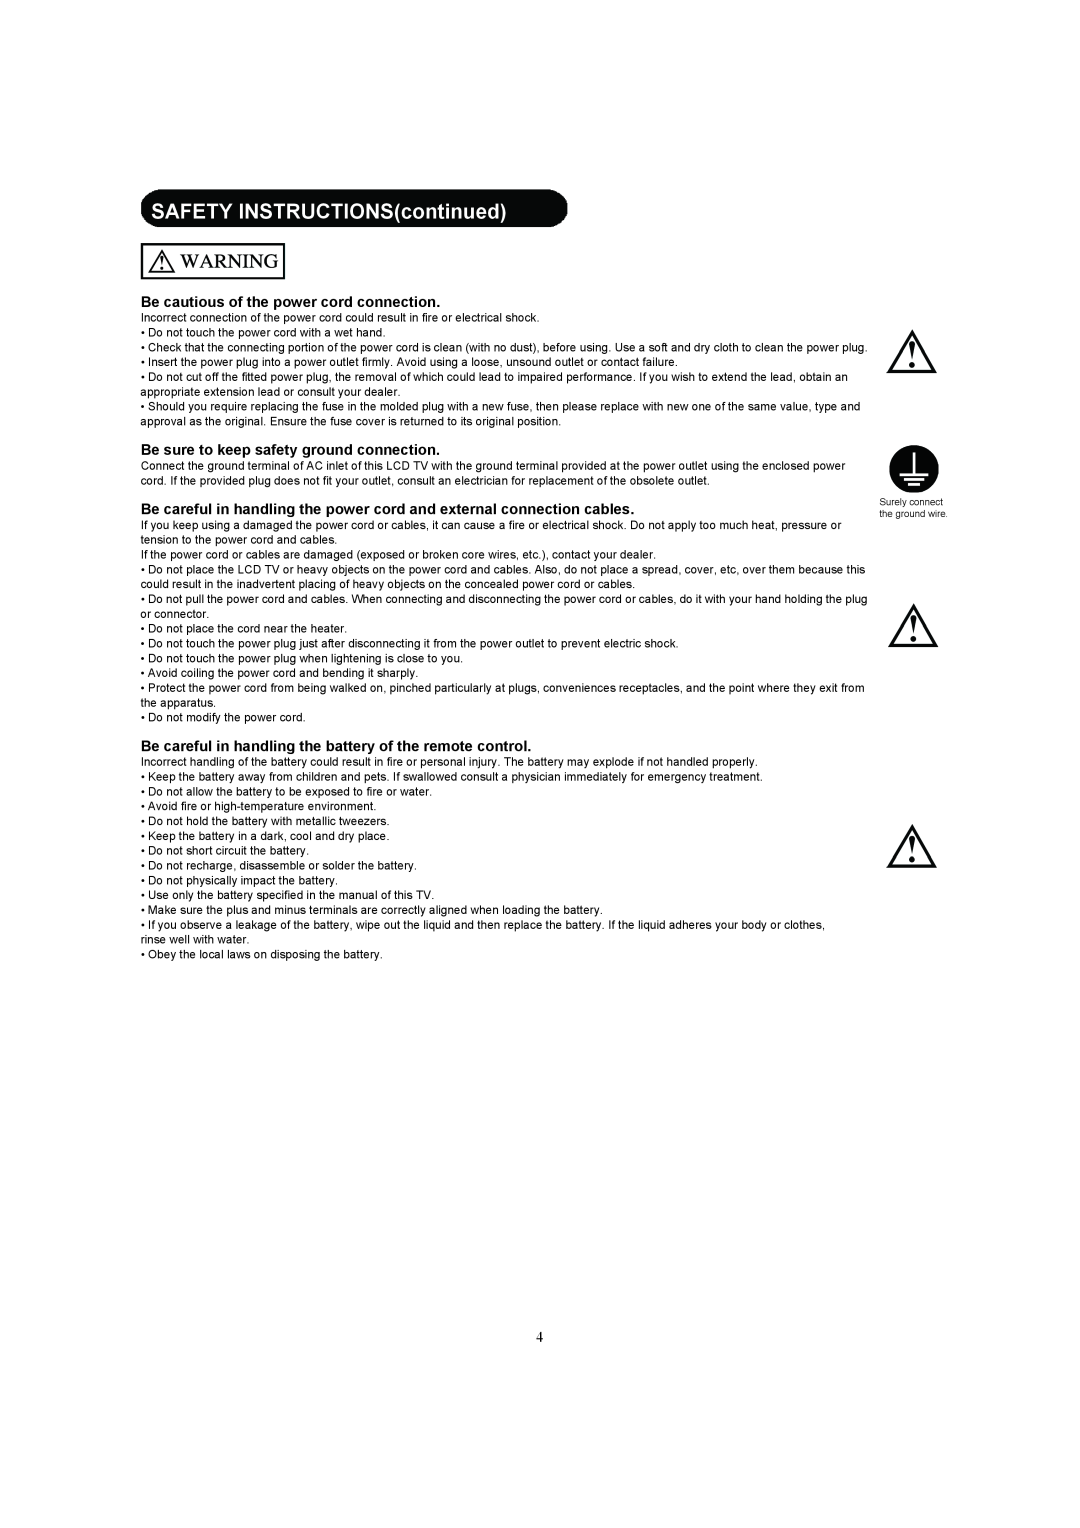 Hitachi 32HDL52A, 37HDL52A SAFETY INSTRUCTIONScontinued, Be cautious of the power cord connection 